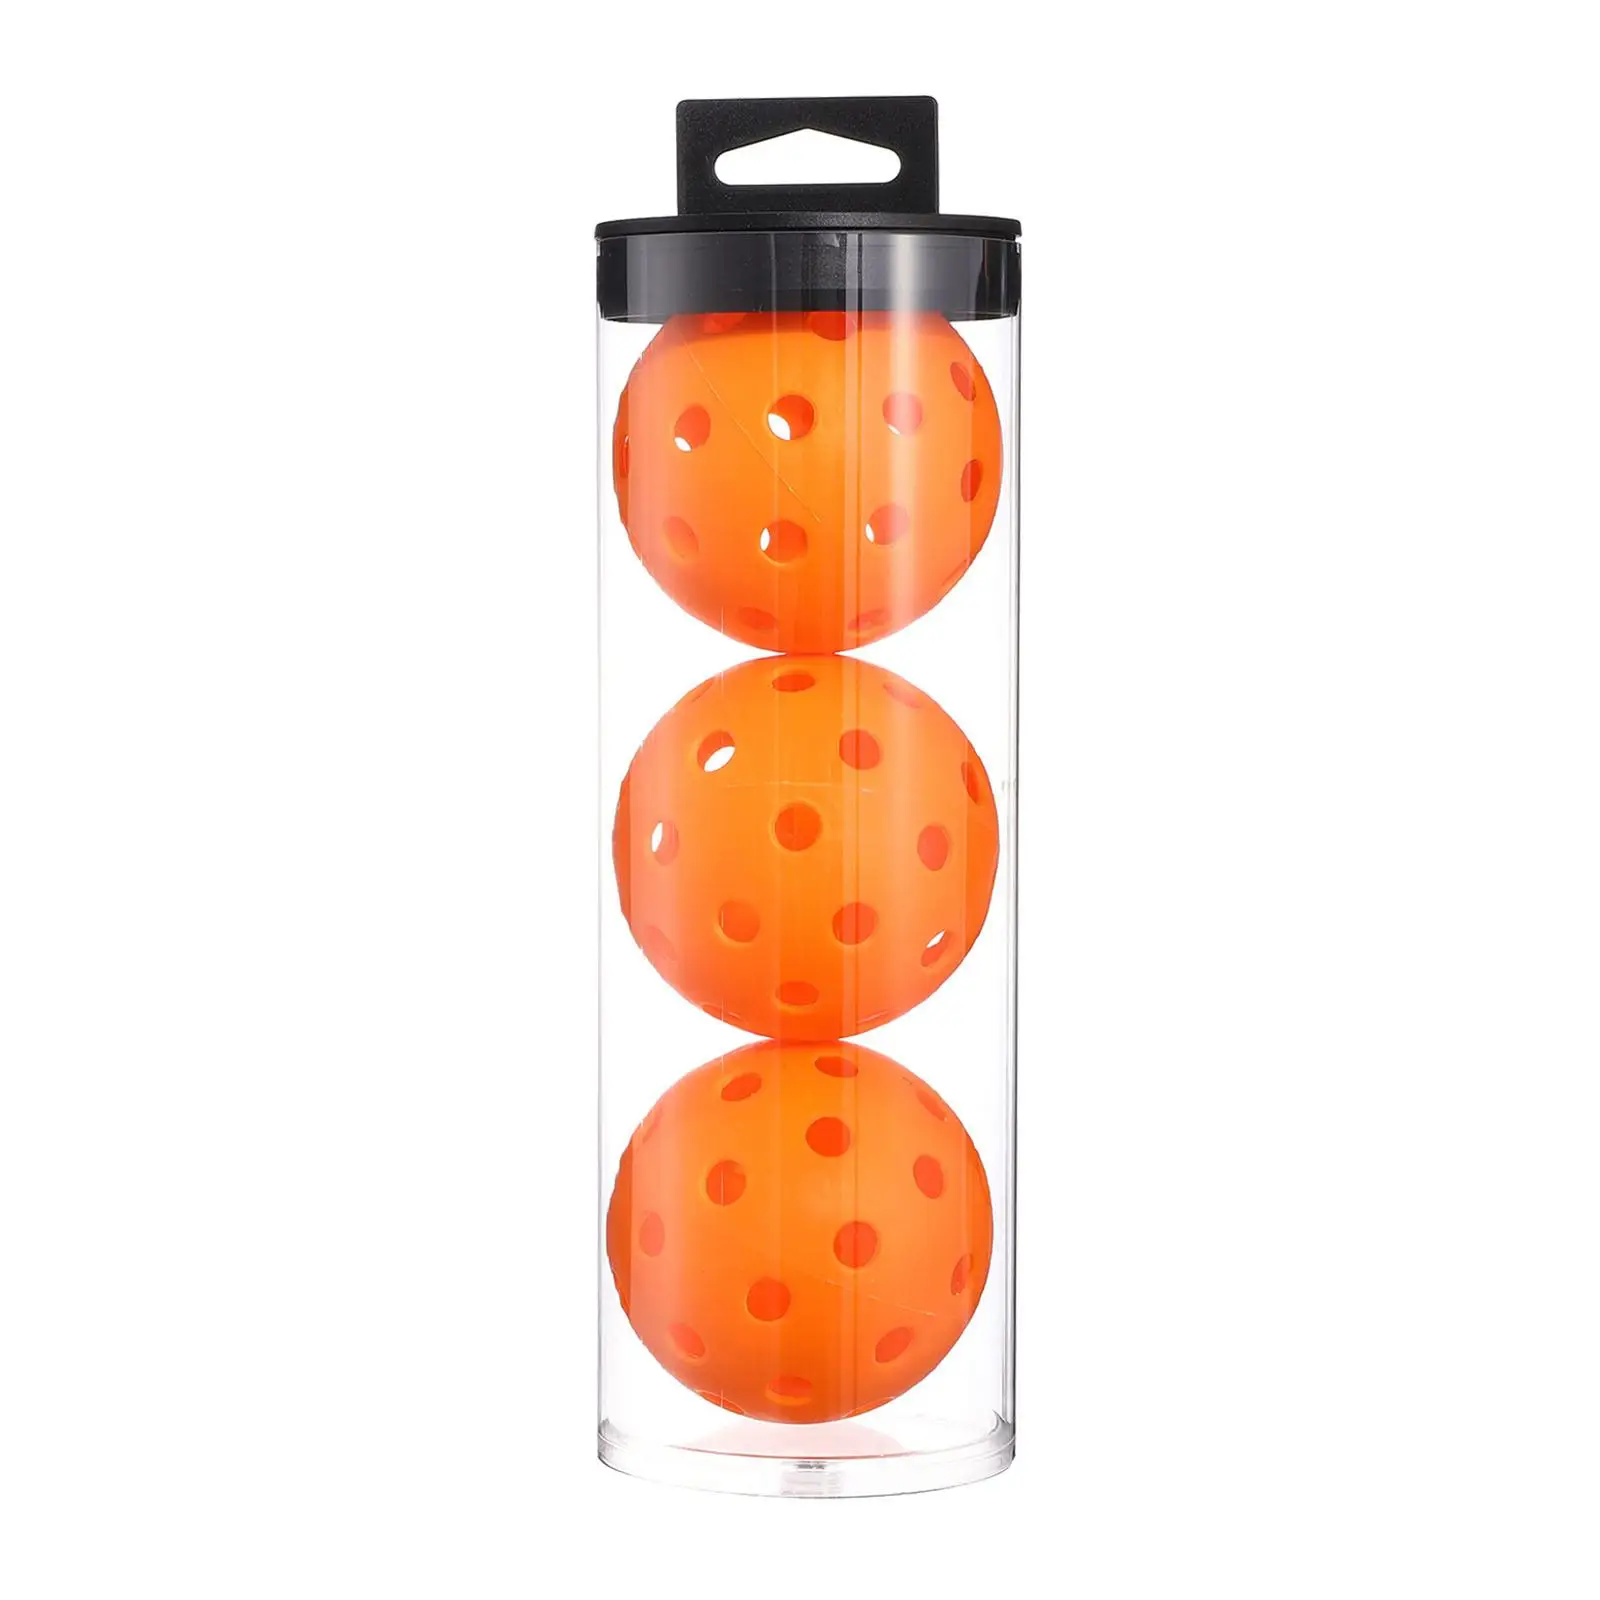 3Pcs Pickleball Ball Professional with 40 Holes Practice Toy Ball for Outdoor Courts Training Practice Tournament Play Adult